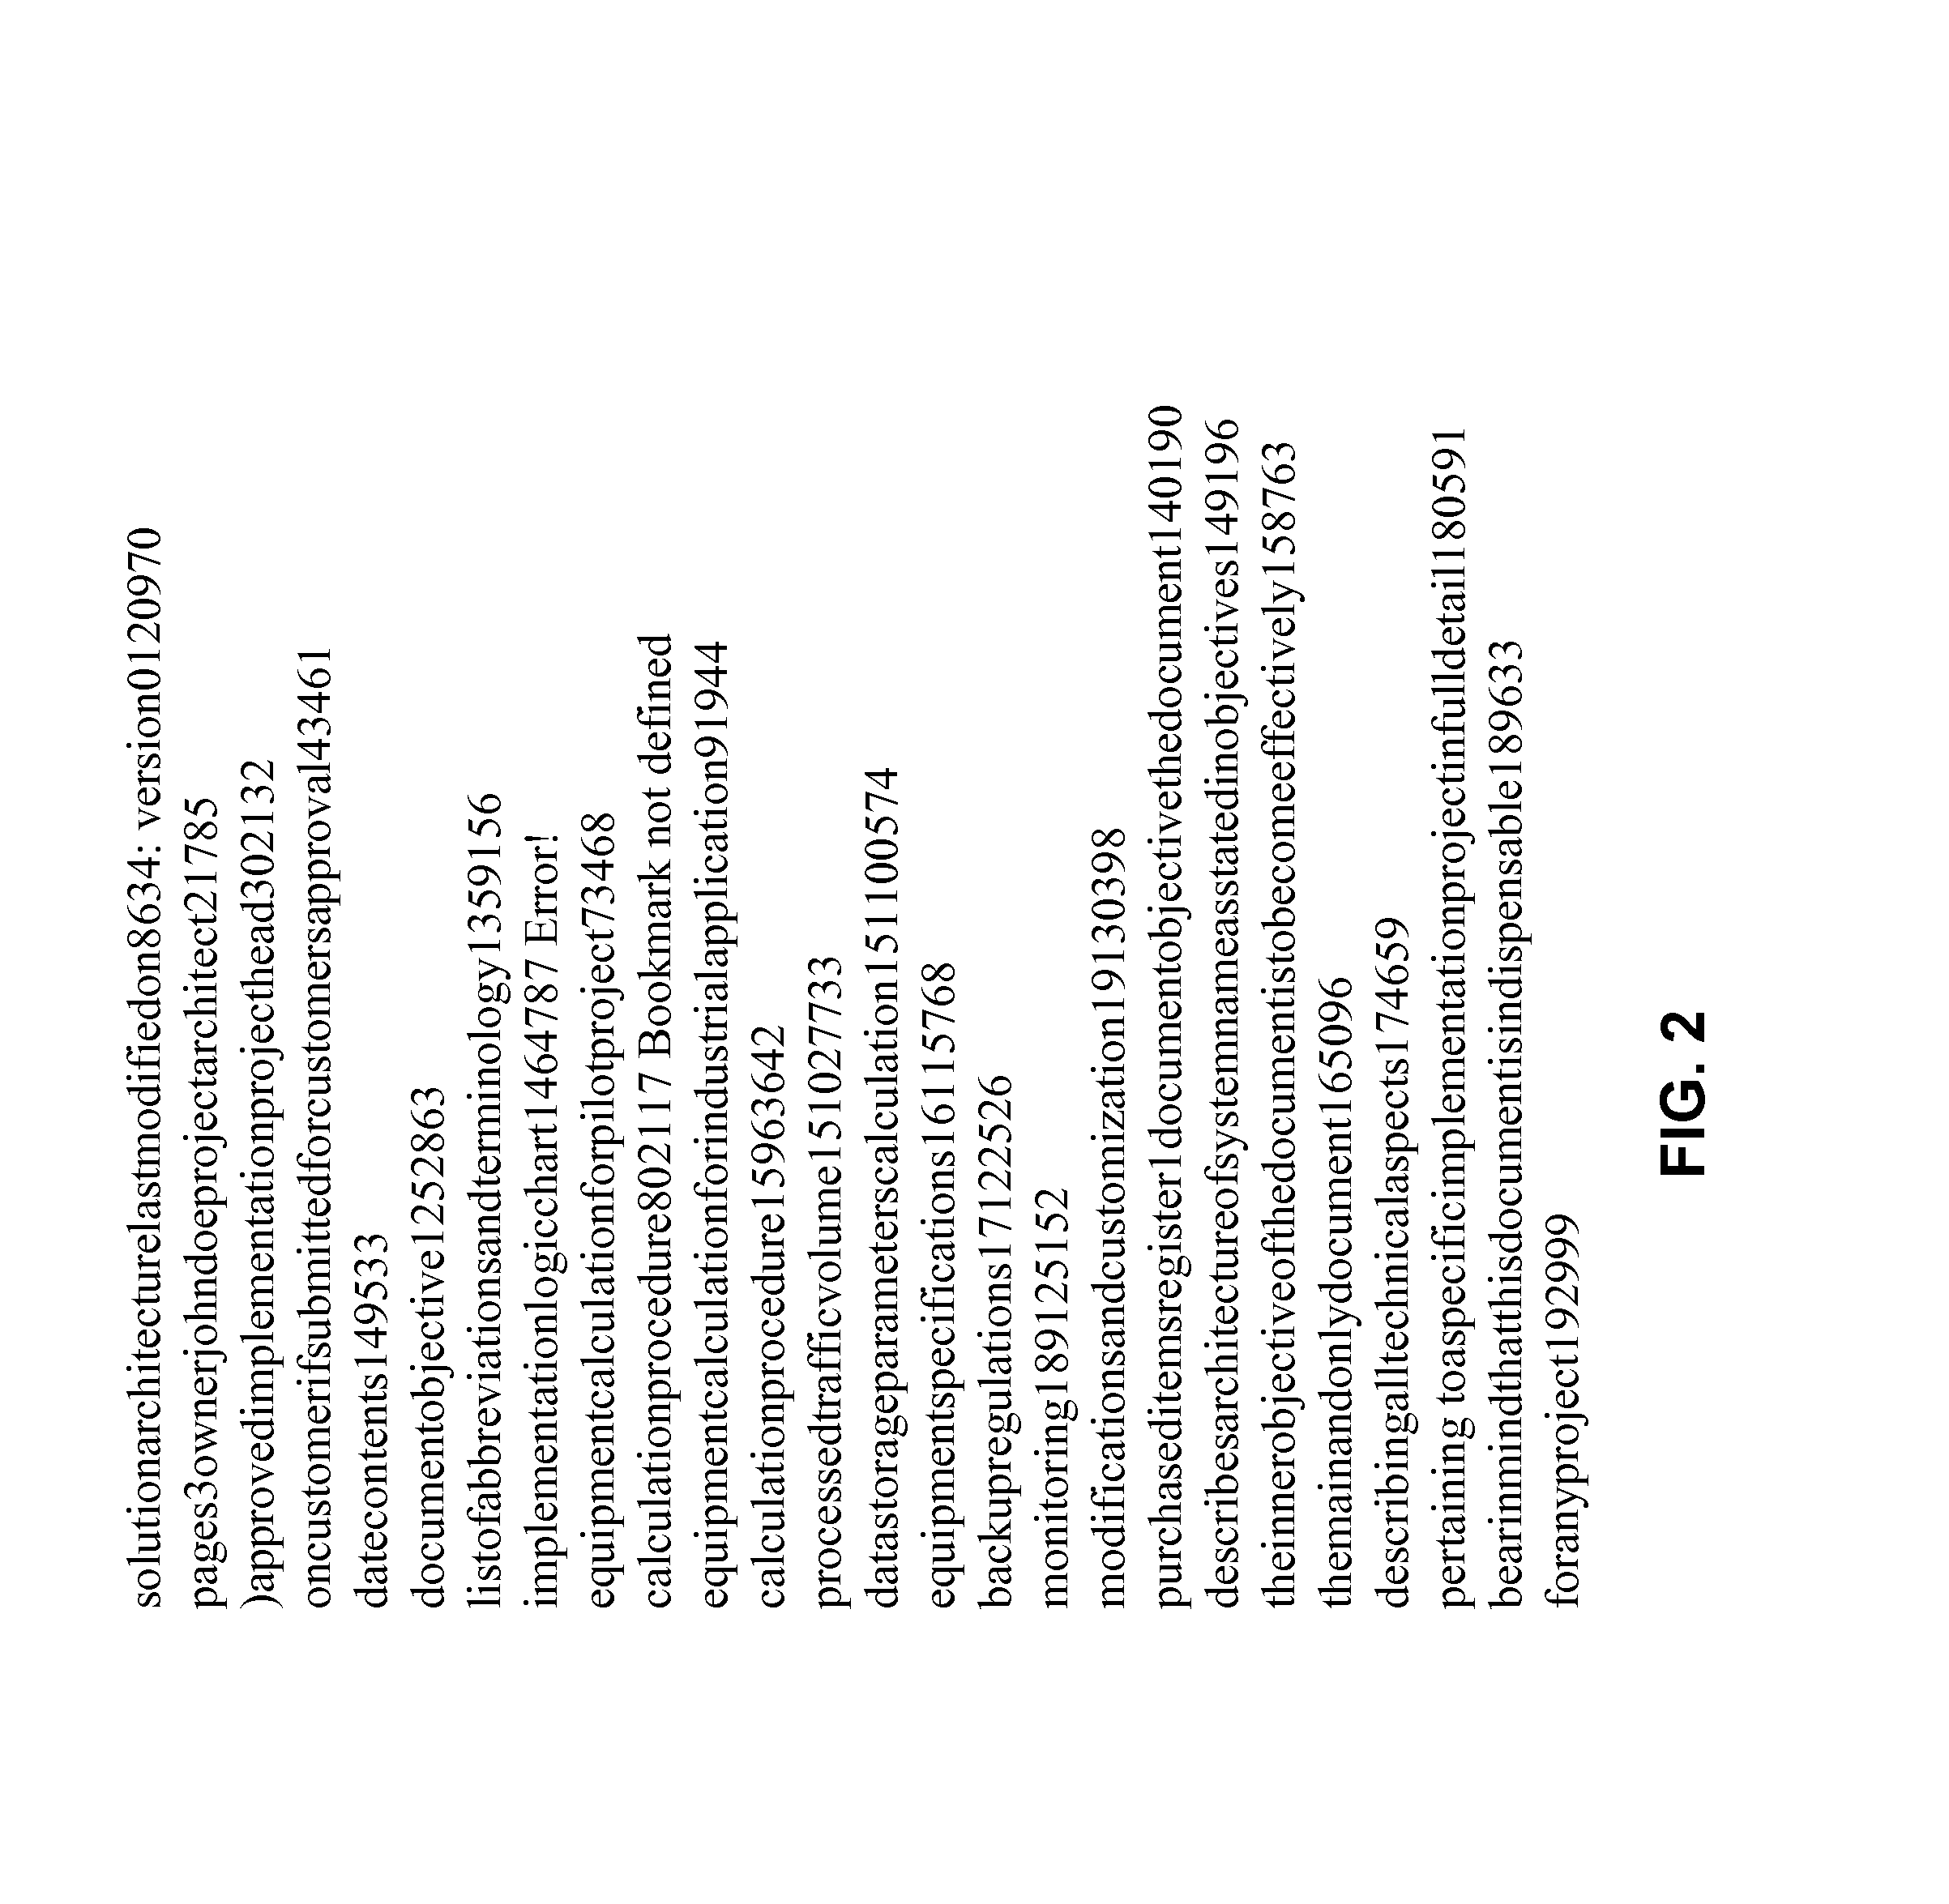 Method of automated analysis of text documents